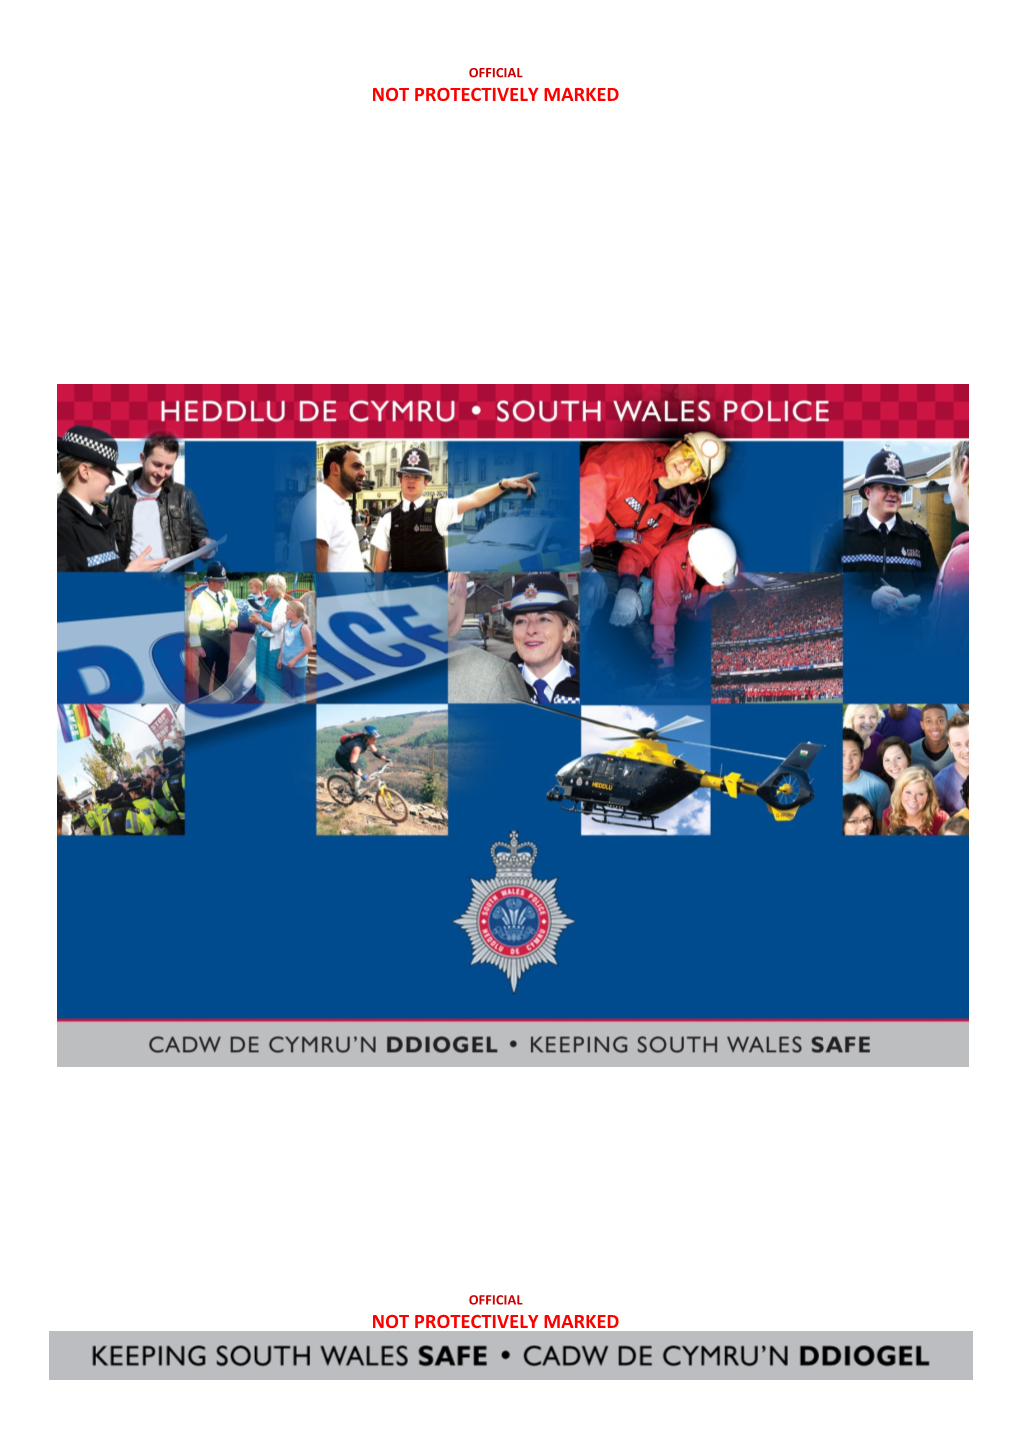 About South Wales Police